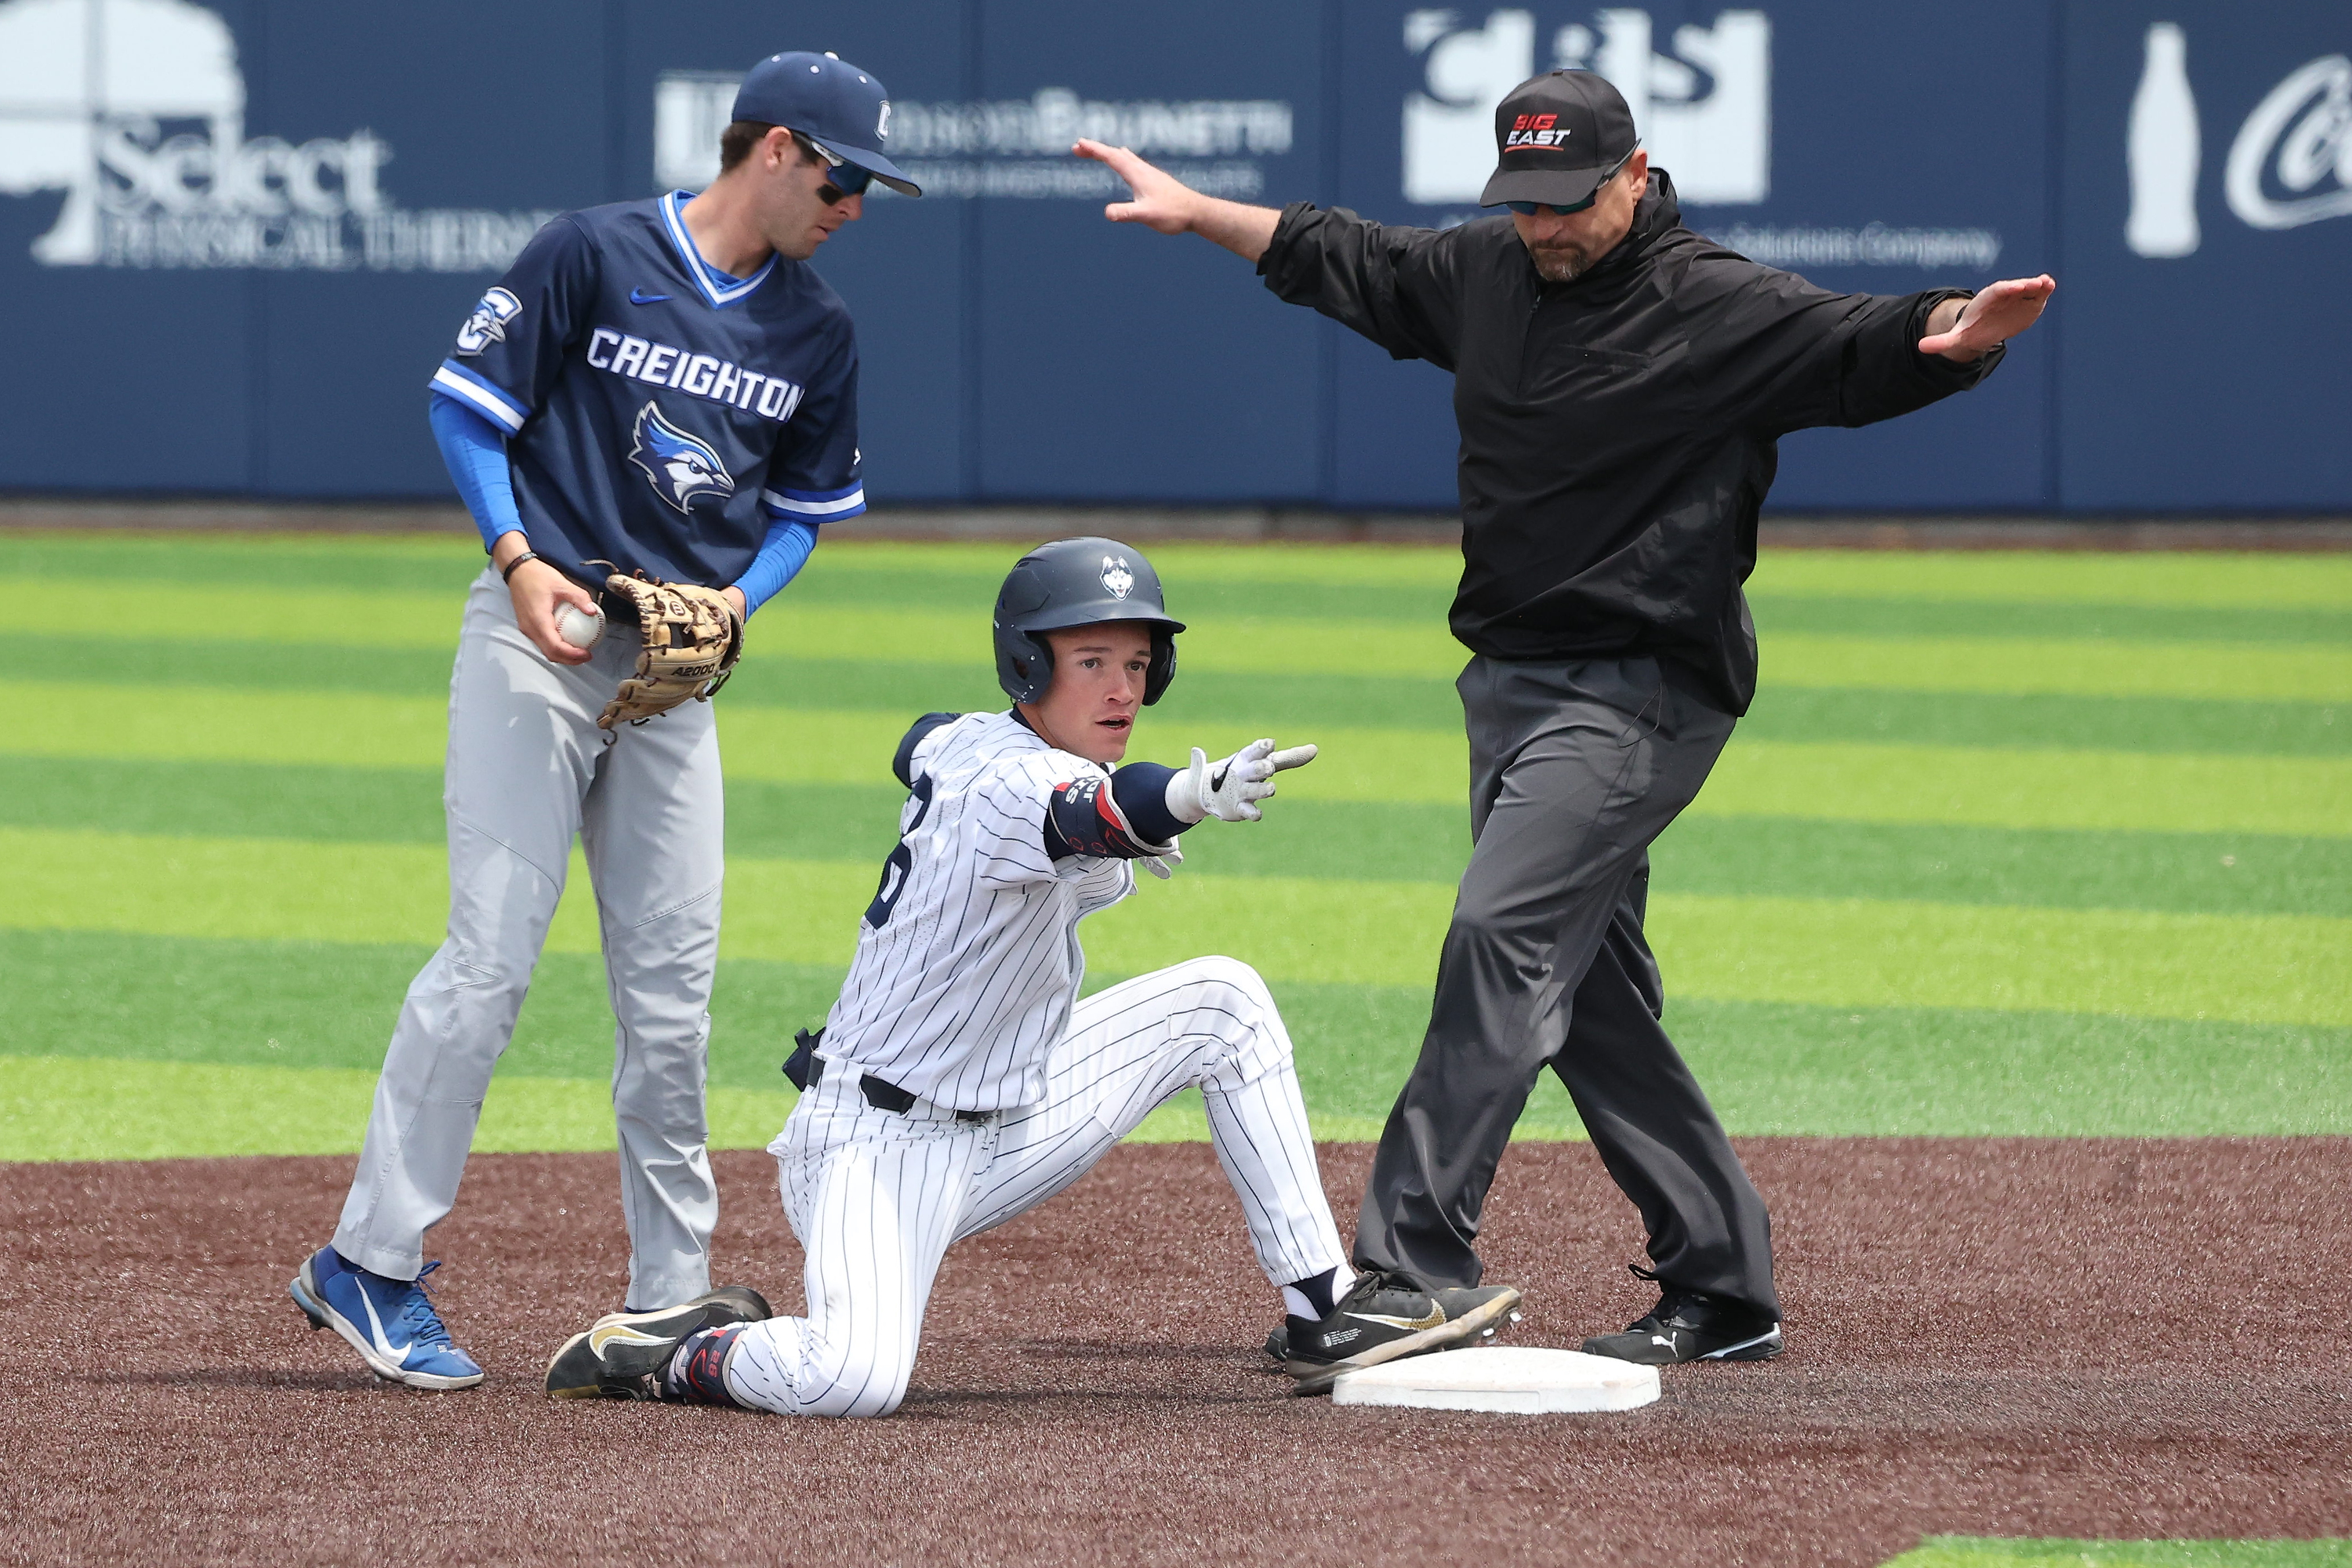 UConn’s T.C. Simmons #26 celebrates after his run-scoring double in the 6th inning vs Creighton on Sunday afternoon.